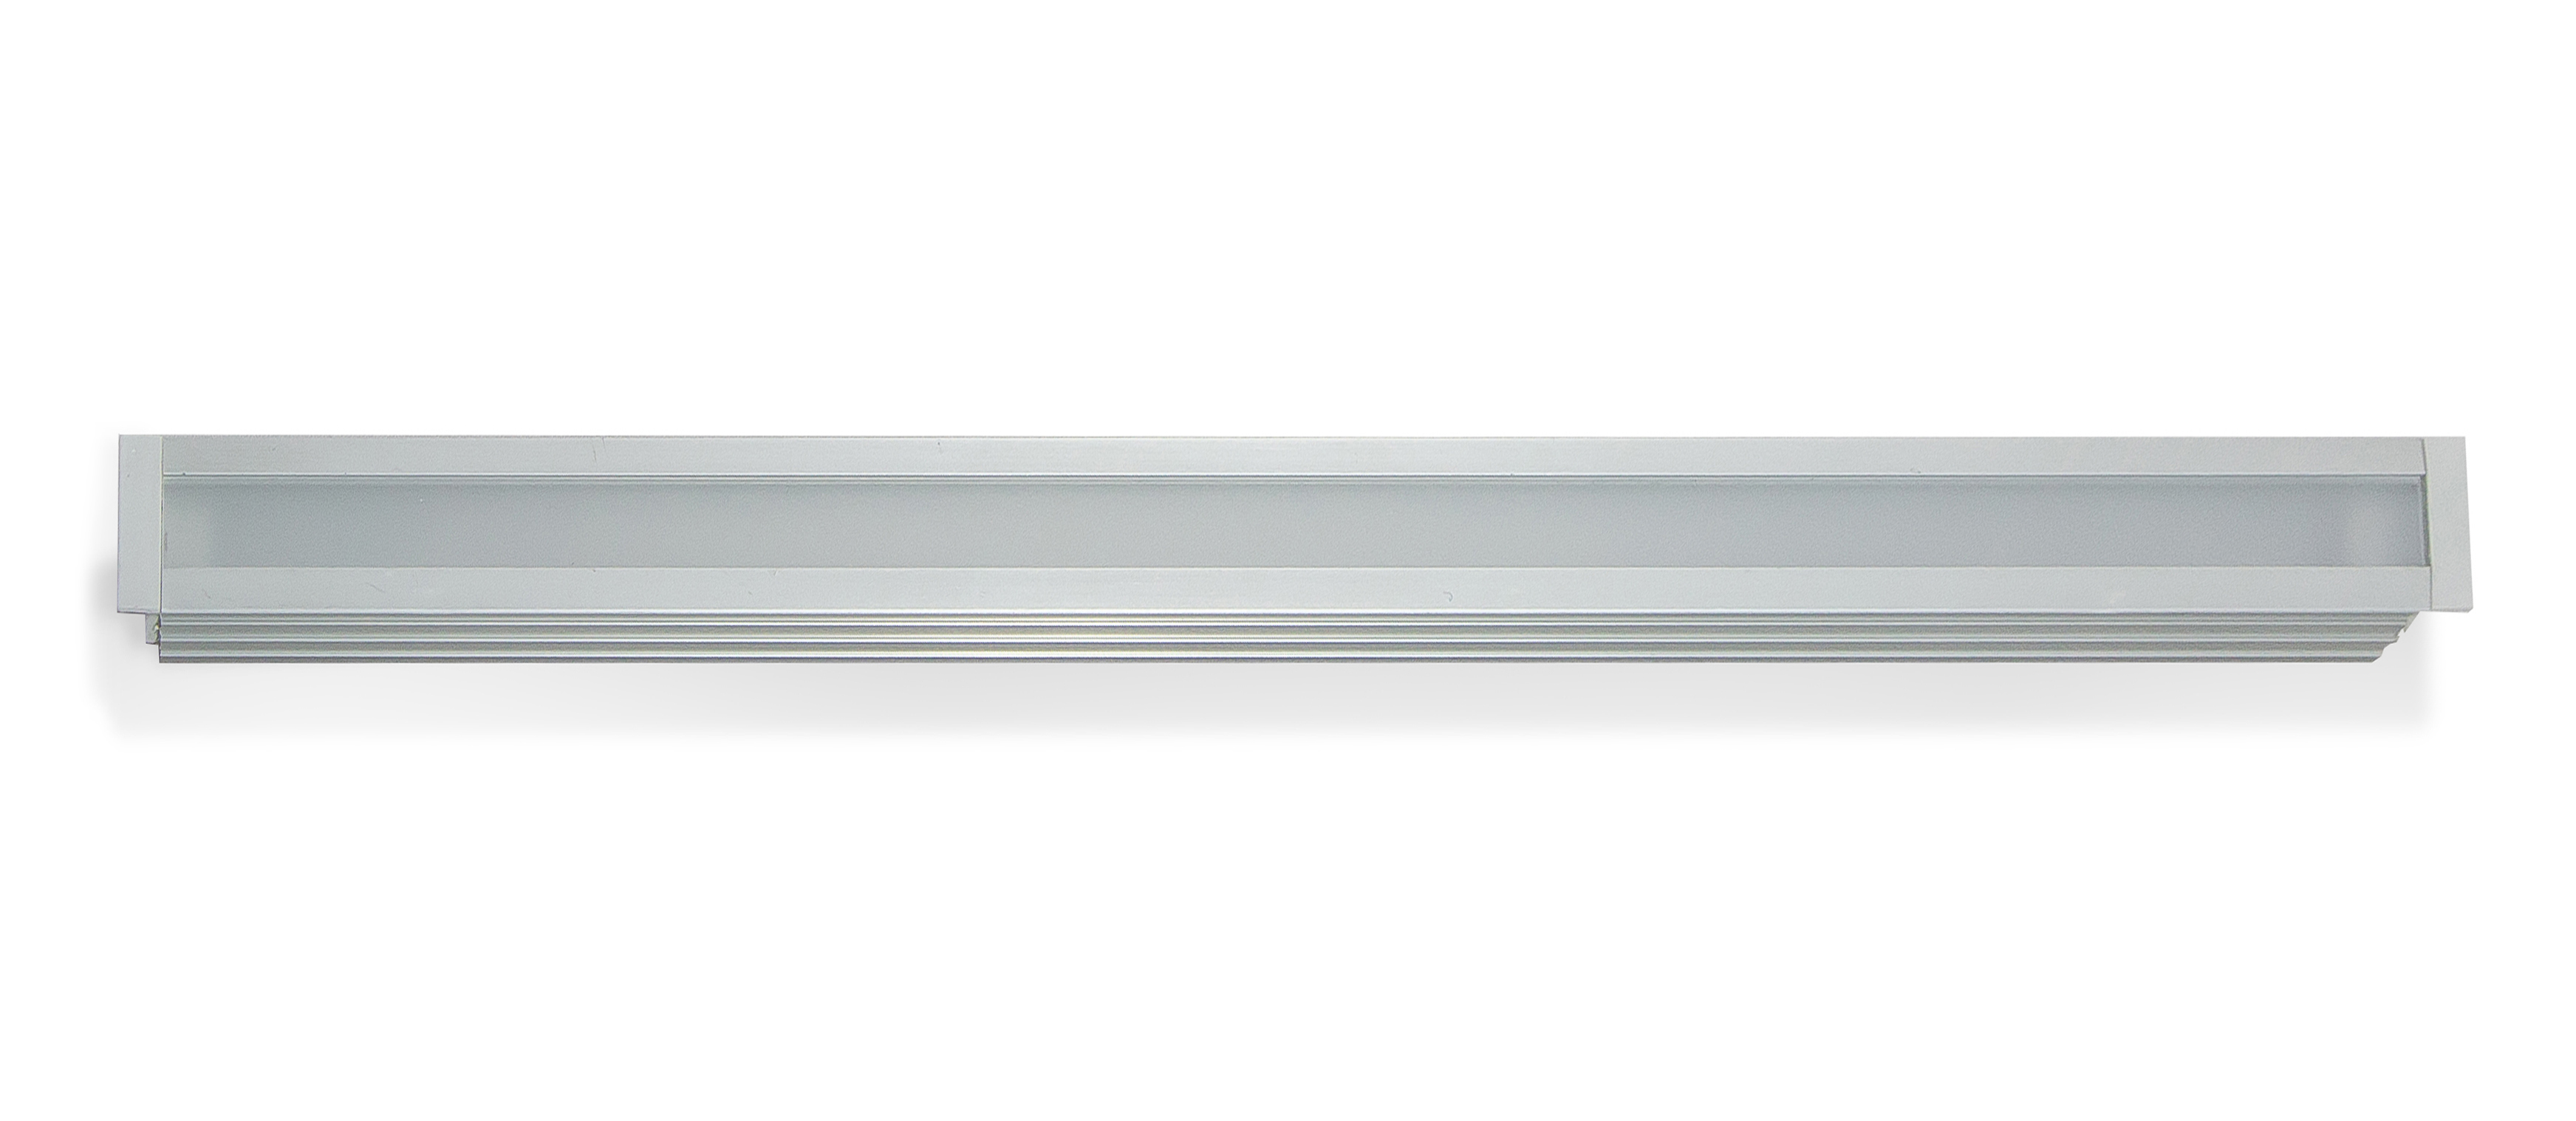 Led lay-line 600 mm 14,4 w 4000k arg. grigio touch